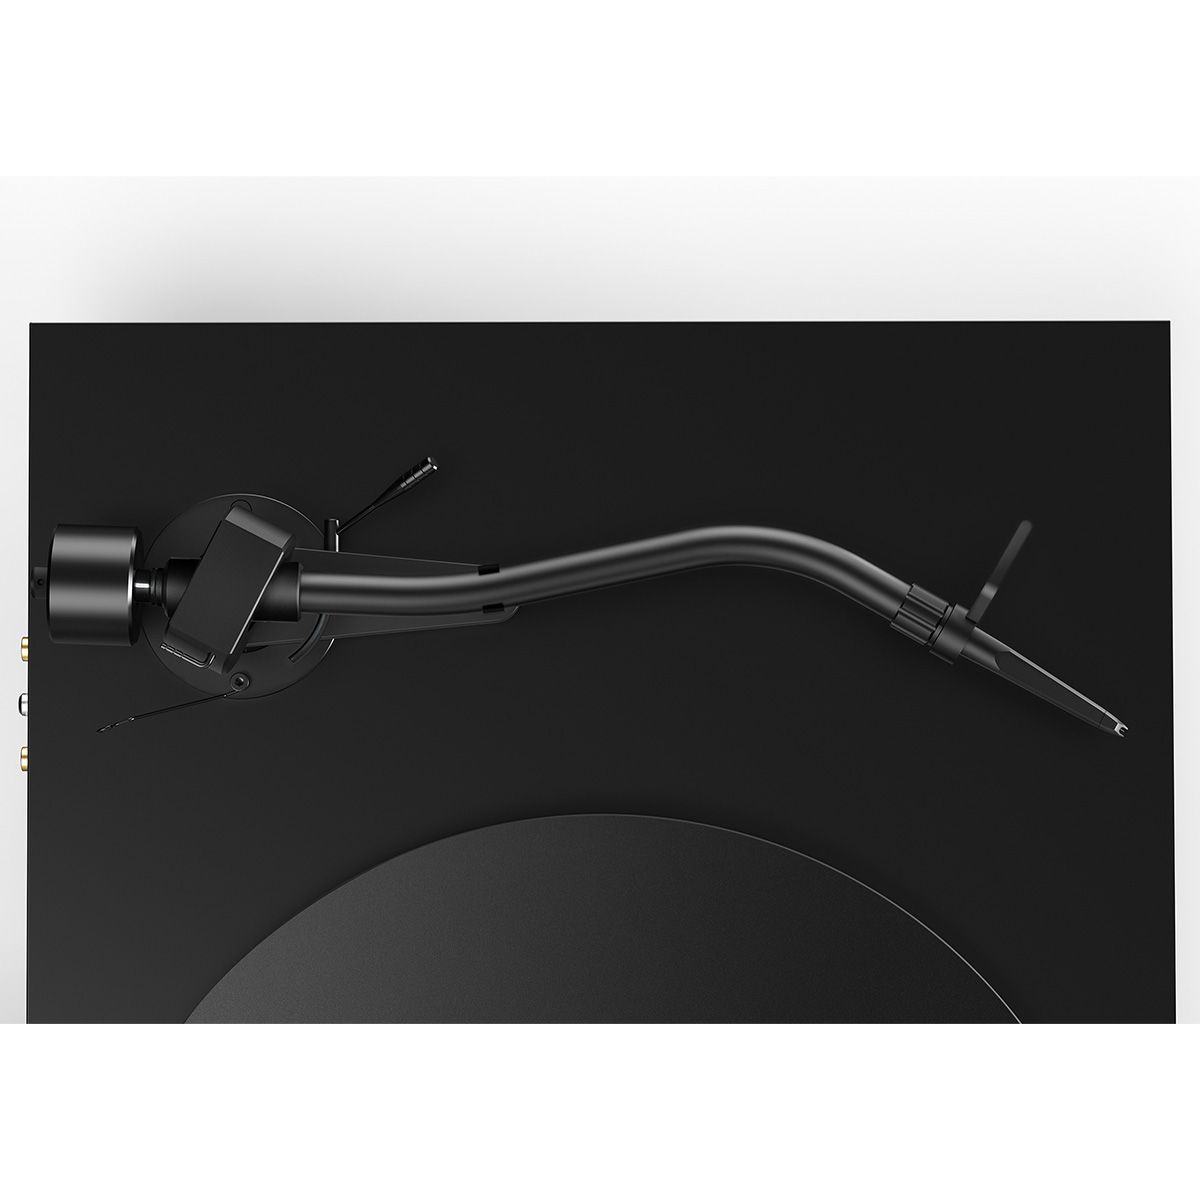  Pro-Ject Debut Pro S Turntable closeup of s-shaped tonearm